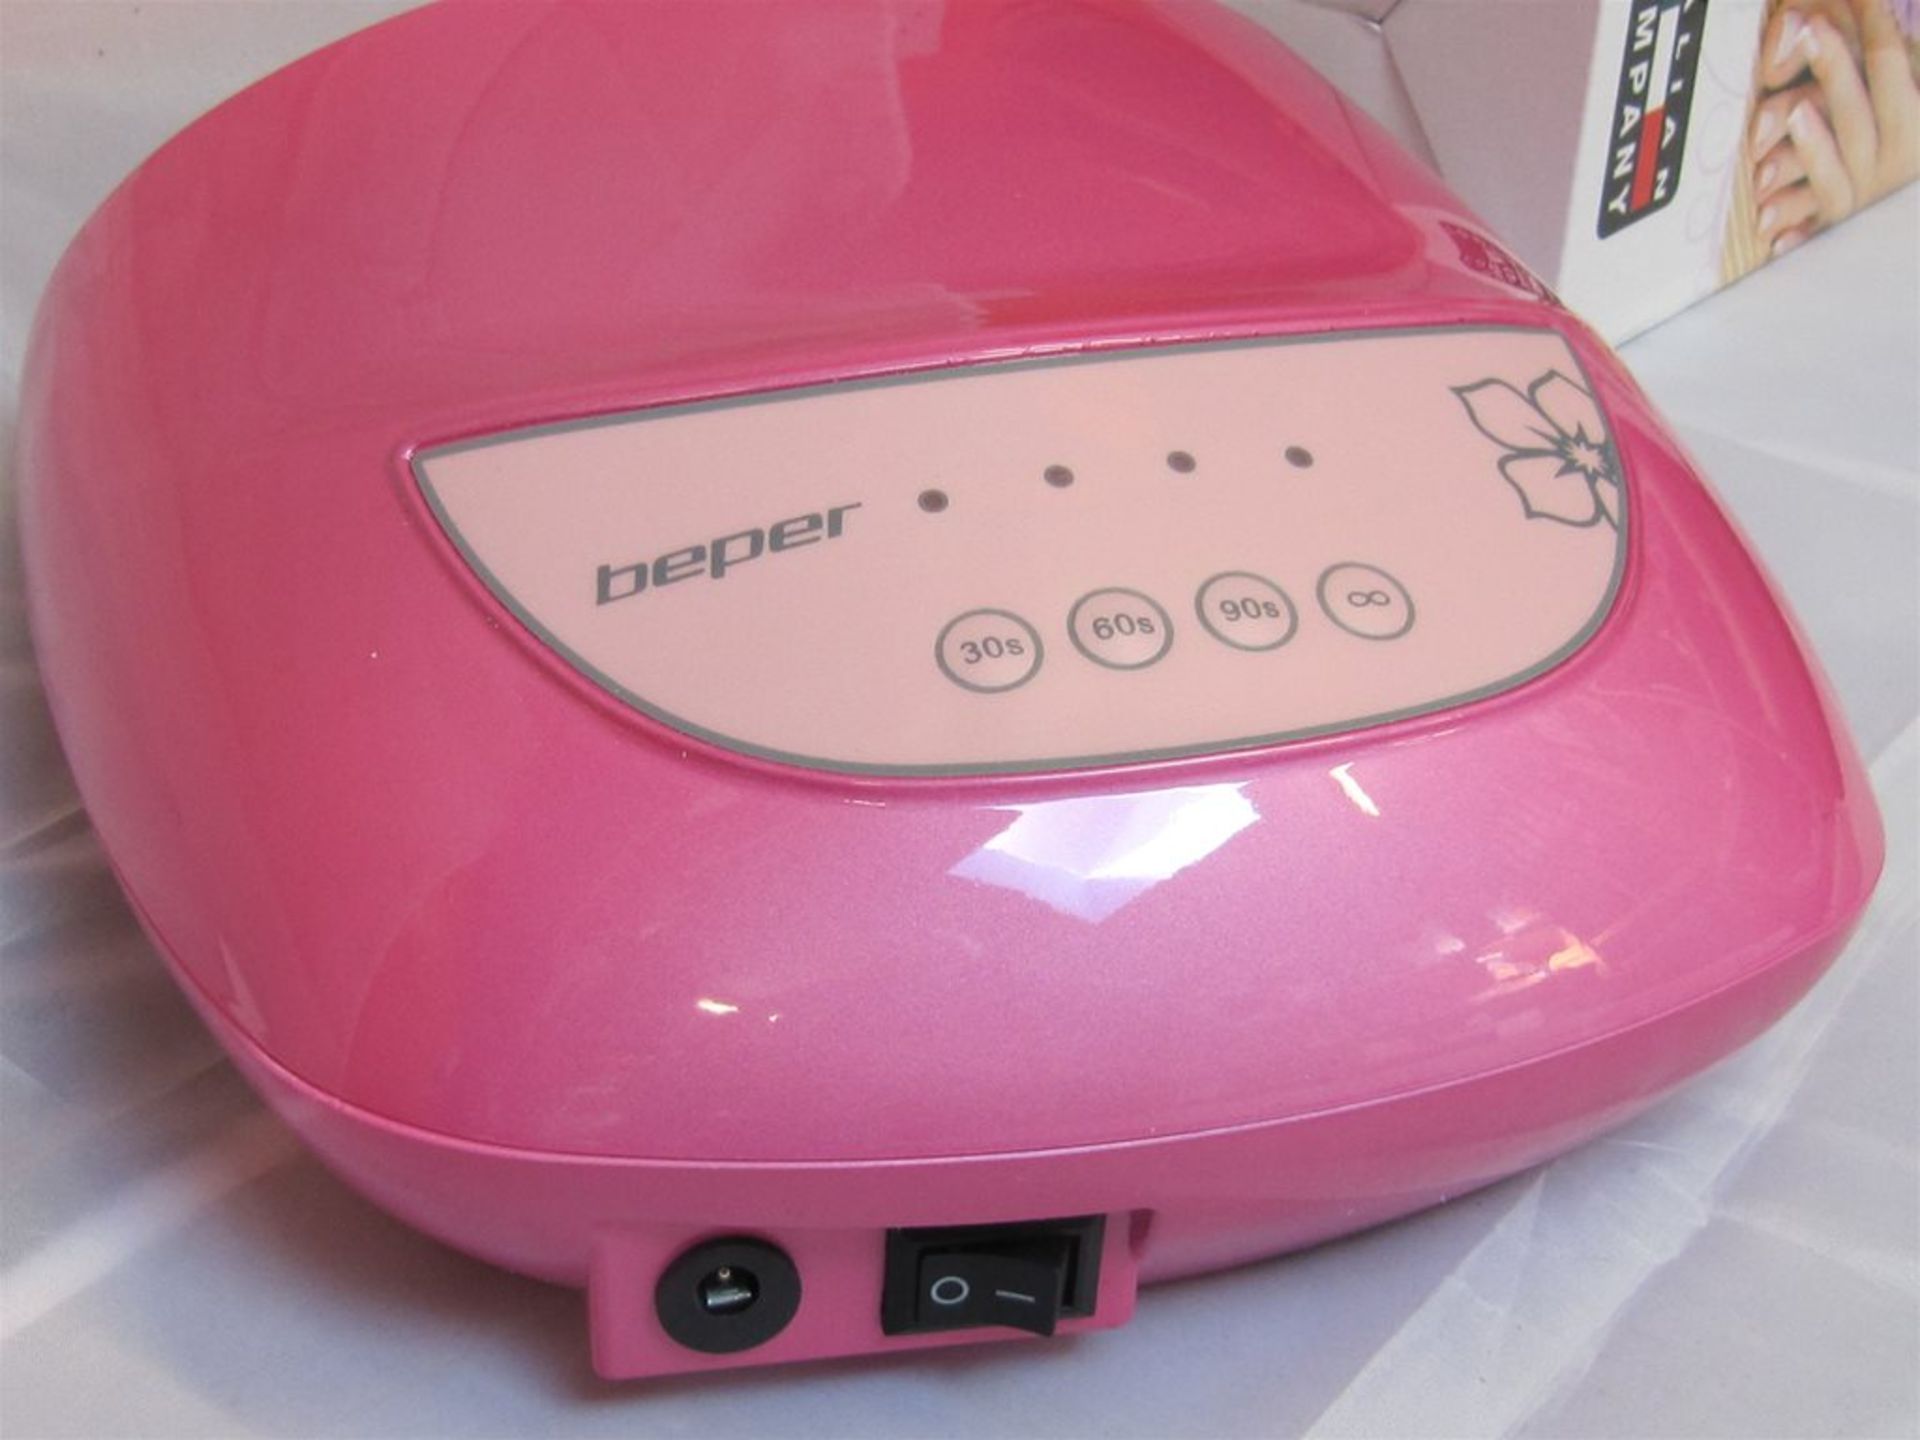 73) Beper LED Nail Lamp. 12w Rapid Dry Time. No vat on Hammer. - Image 4 of 4